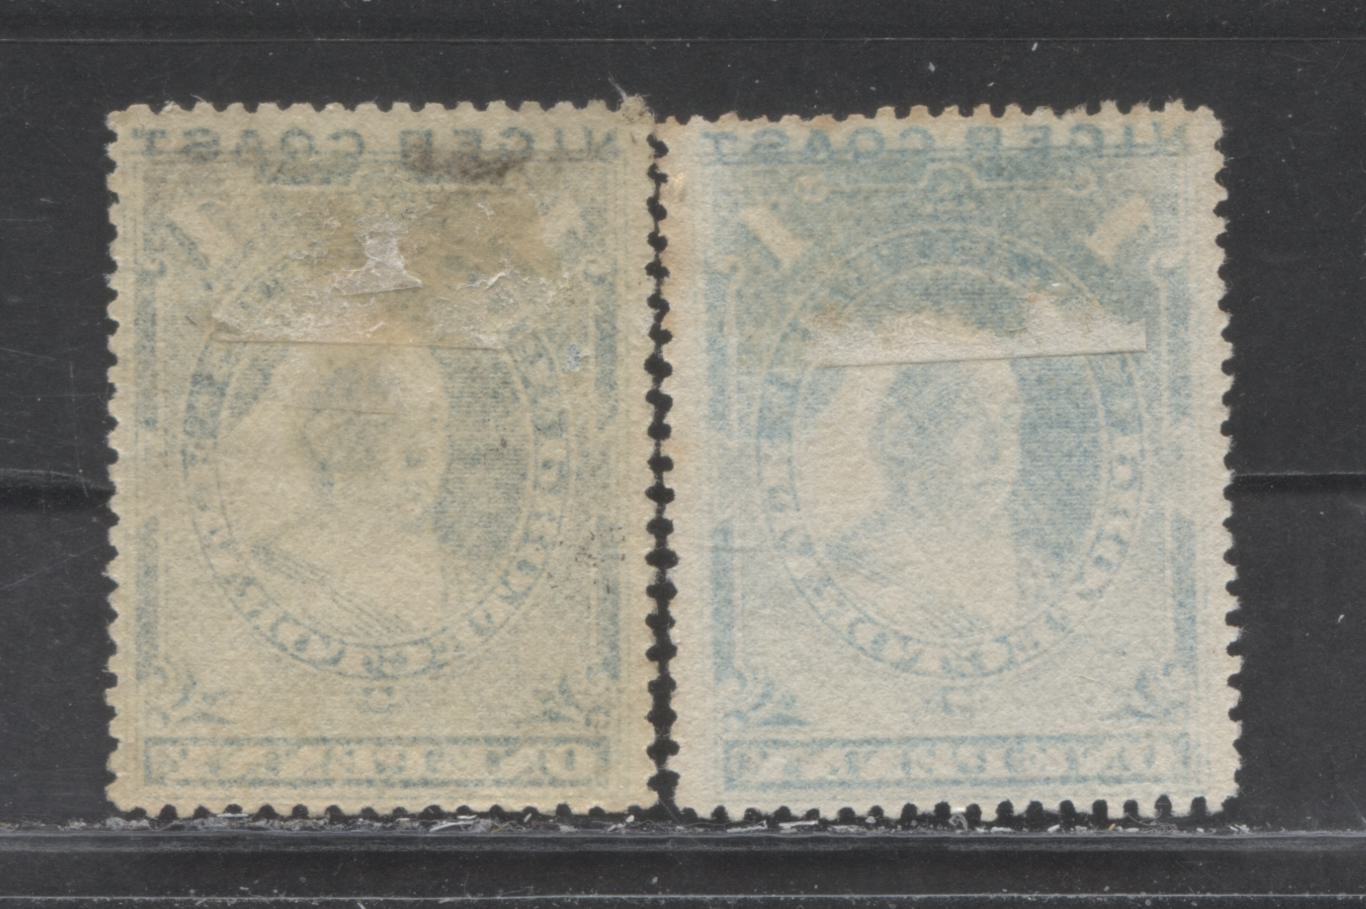 Lot 134 Niger Coast SC#38 (SG#46, 46b) One Penny Light Blue, Dull Blue 1893 Obliterated Oil Rivers Issue, Perf 14.5 - 15, A Very Fine UN Example, Click on Listing to See ALL Pictures, Estimated Value $6 USD